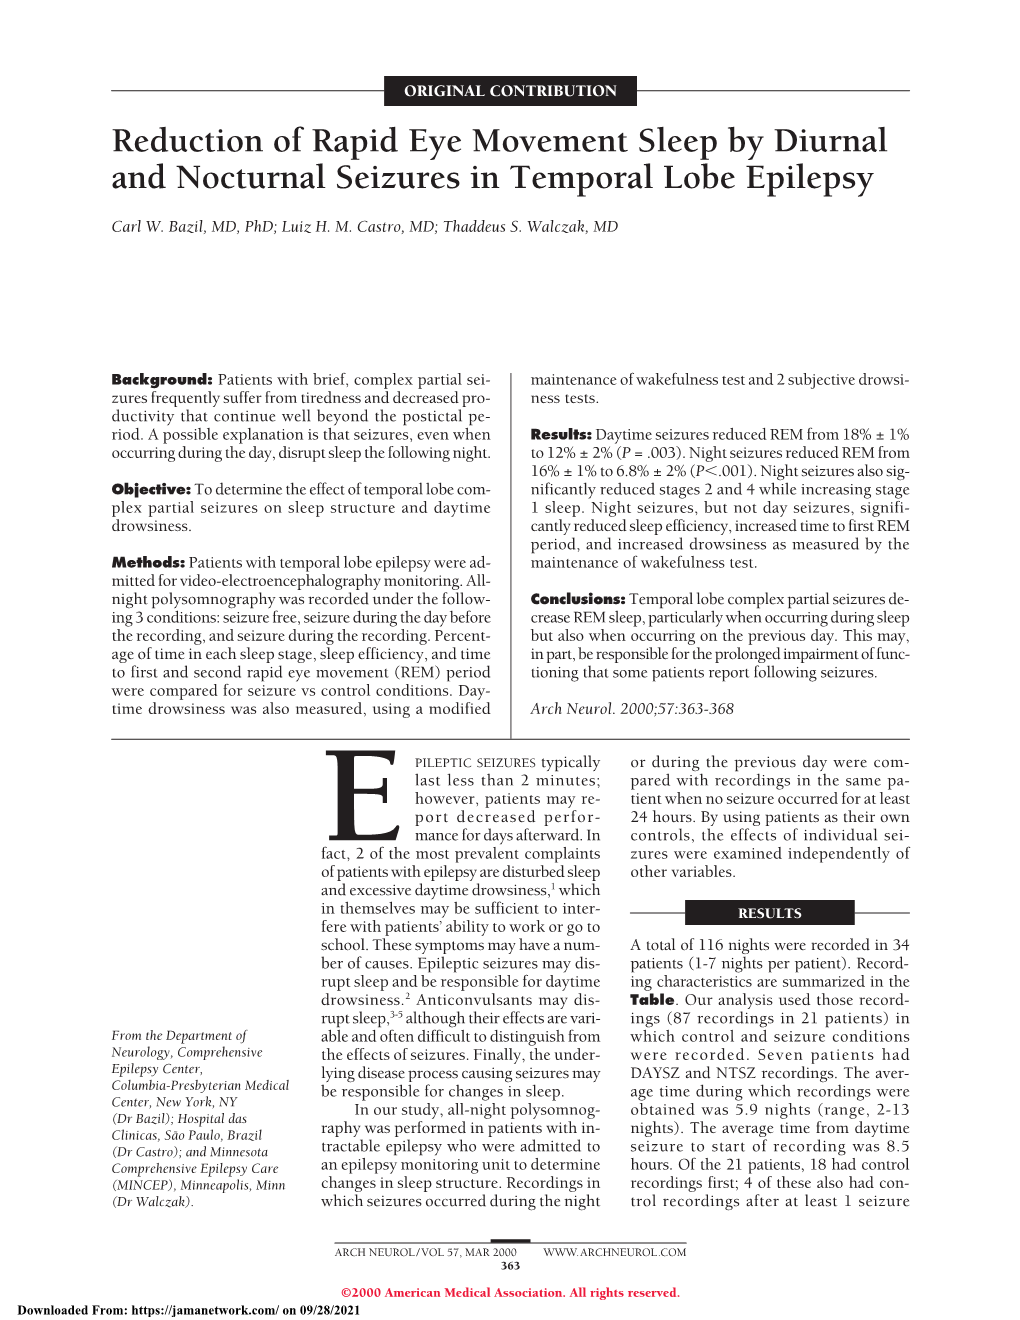 Reduction of Rapid Eye Movement Sleep by Diurnal and Nocturnal Seizures in Temporal Lobe Epilepsy